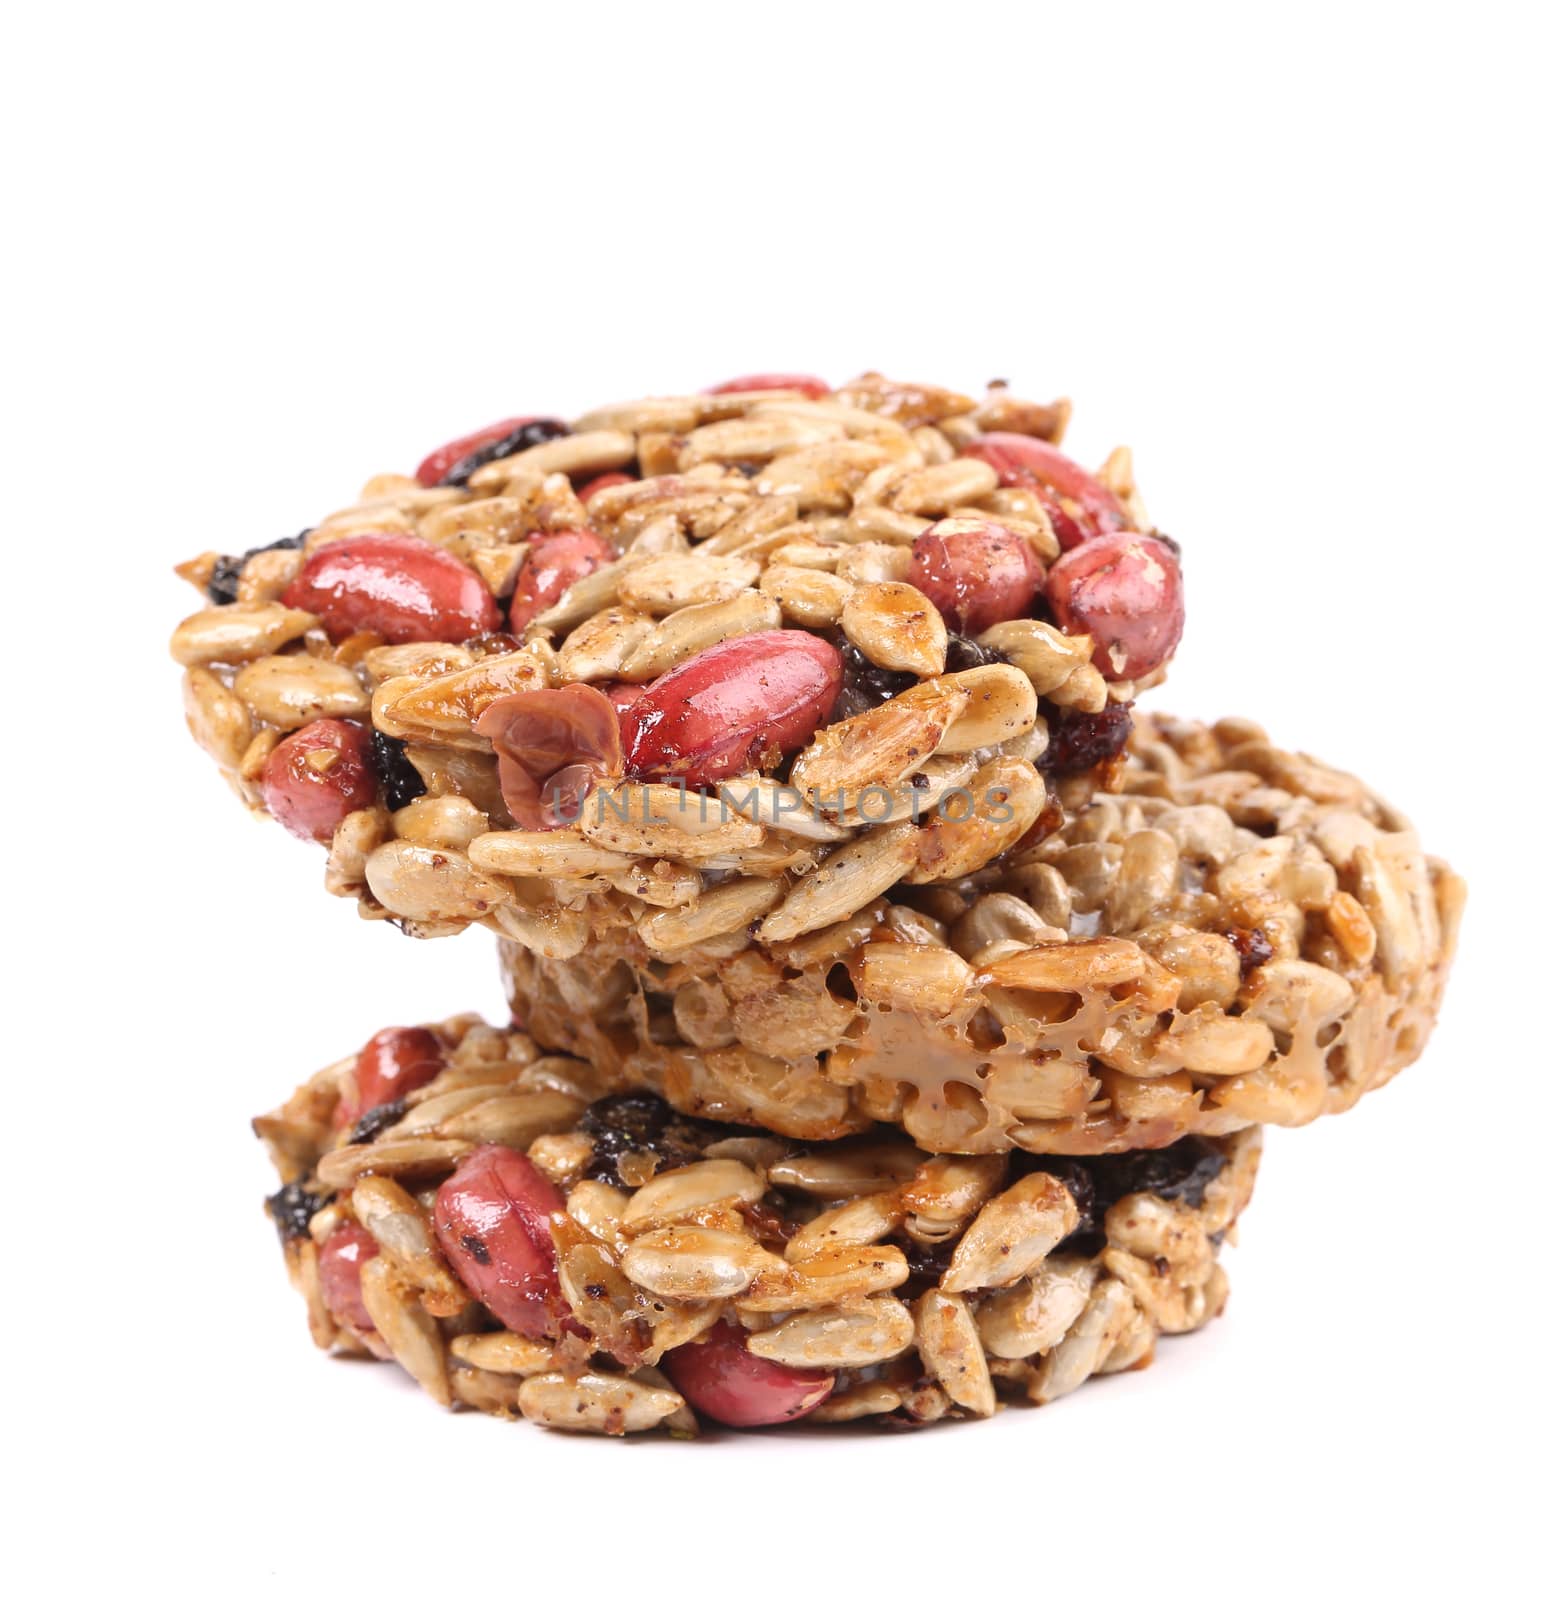 Stack of candied peanuts sunflower seeds. Isolated on a white background.